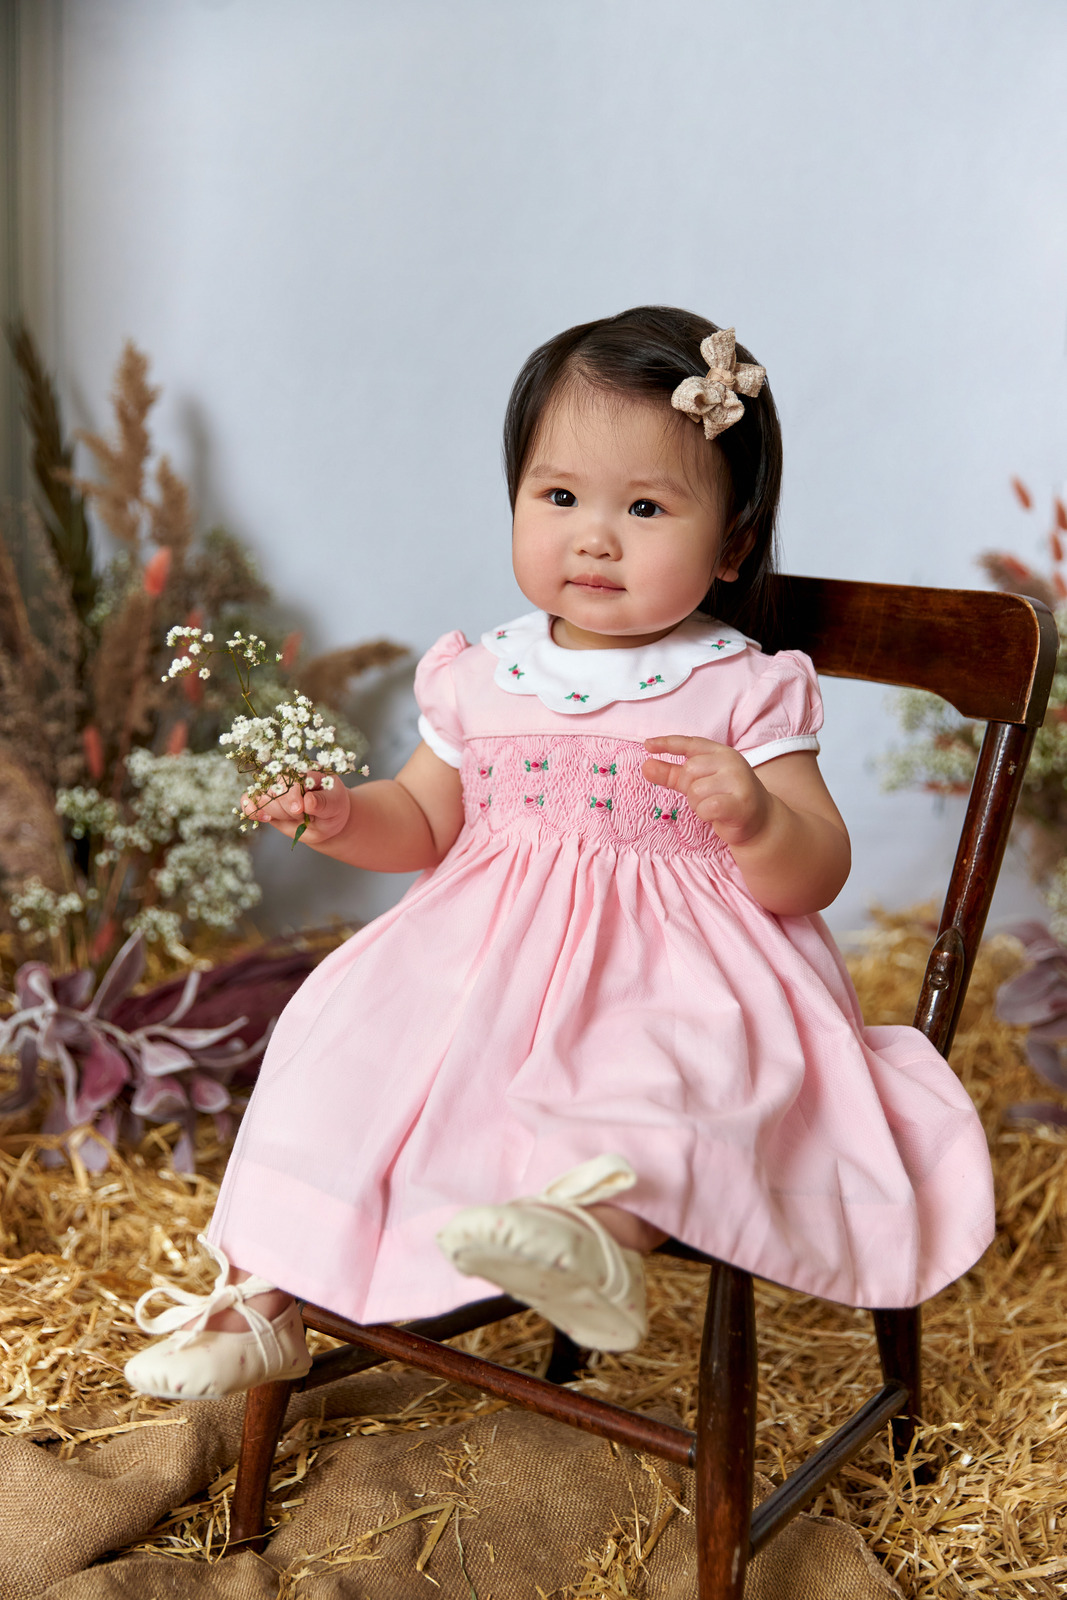 Hand Smocked Dresses – Periwinkle